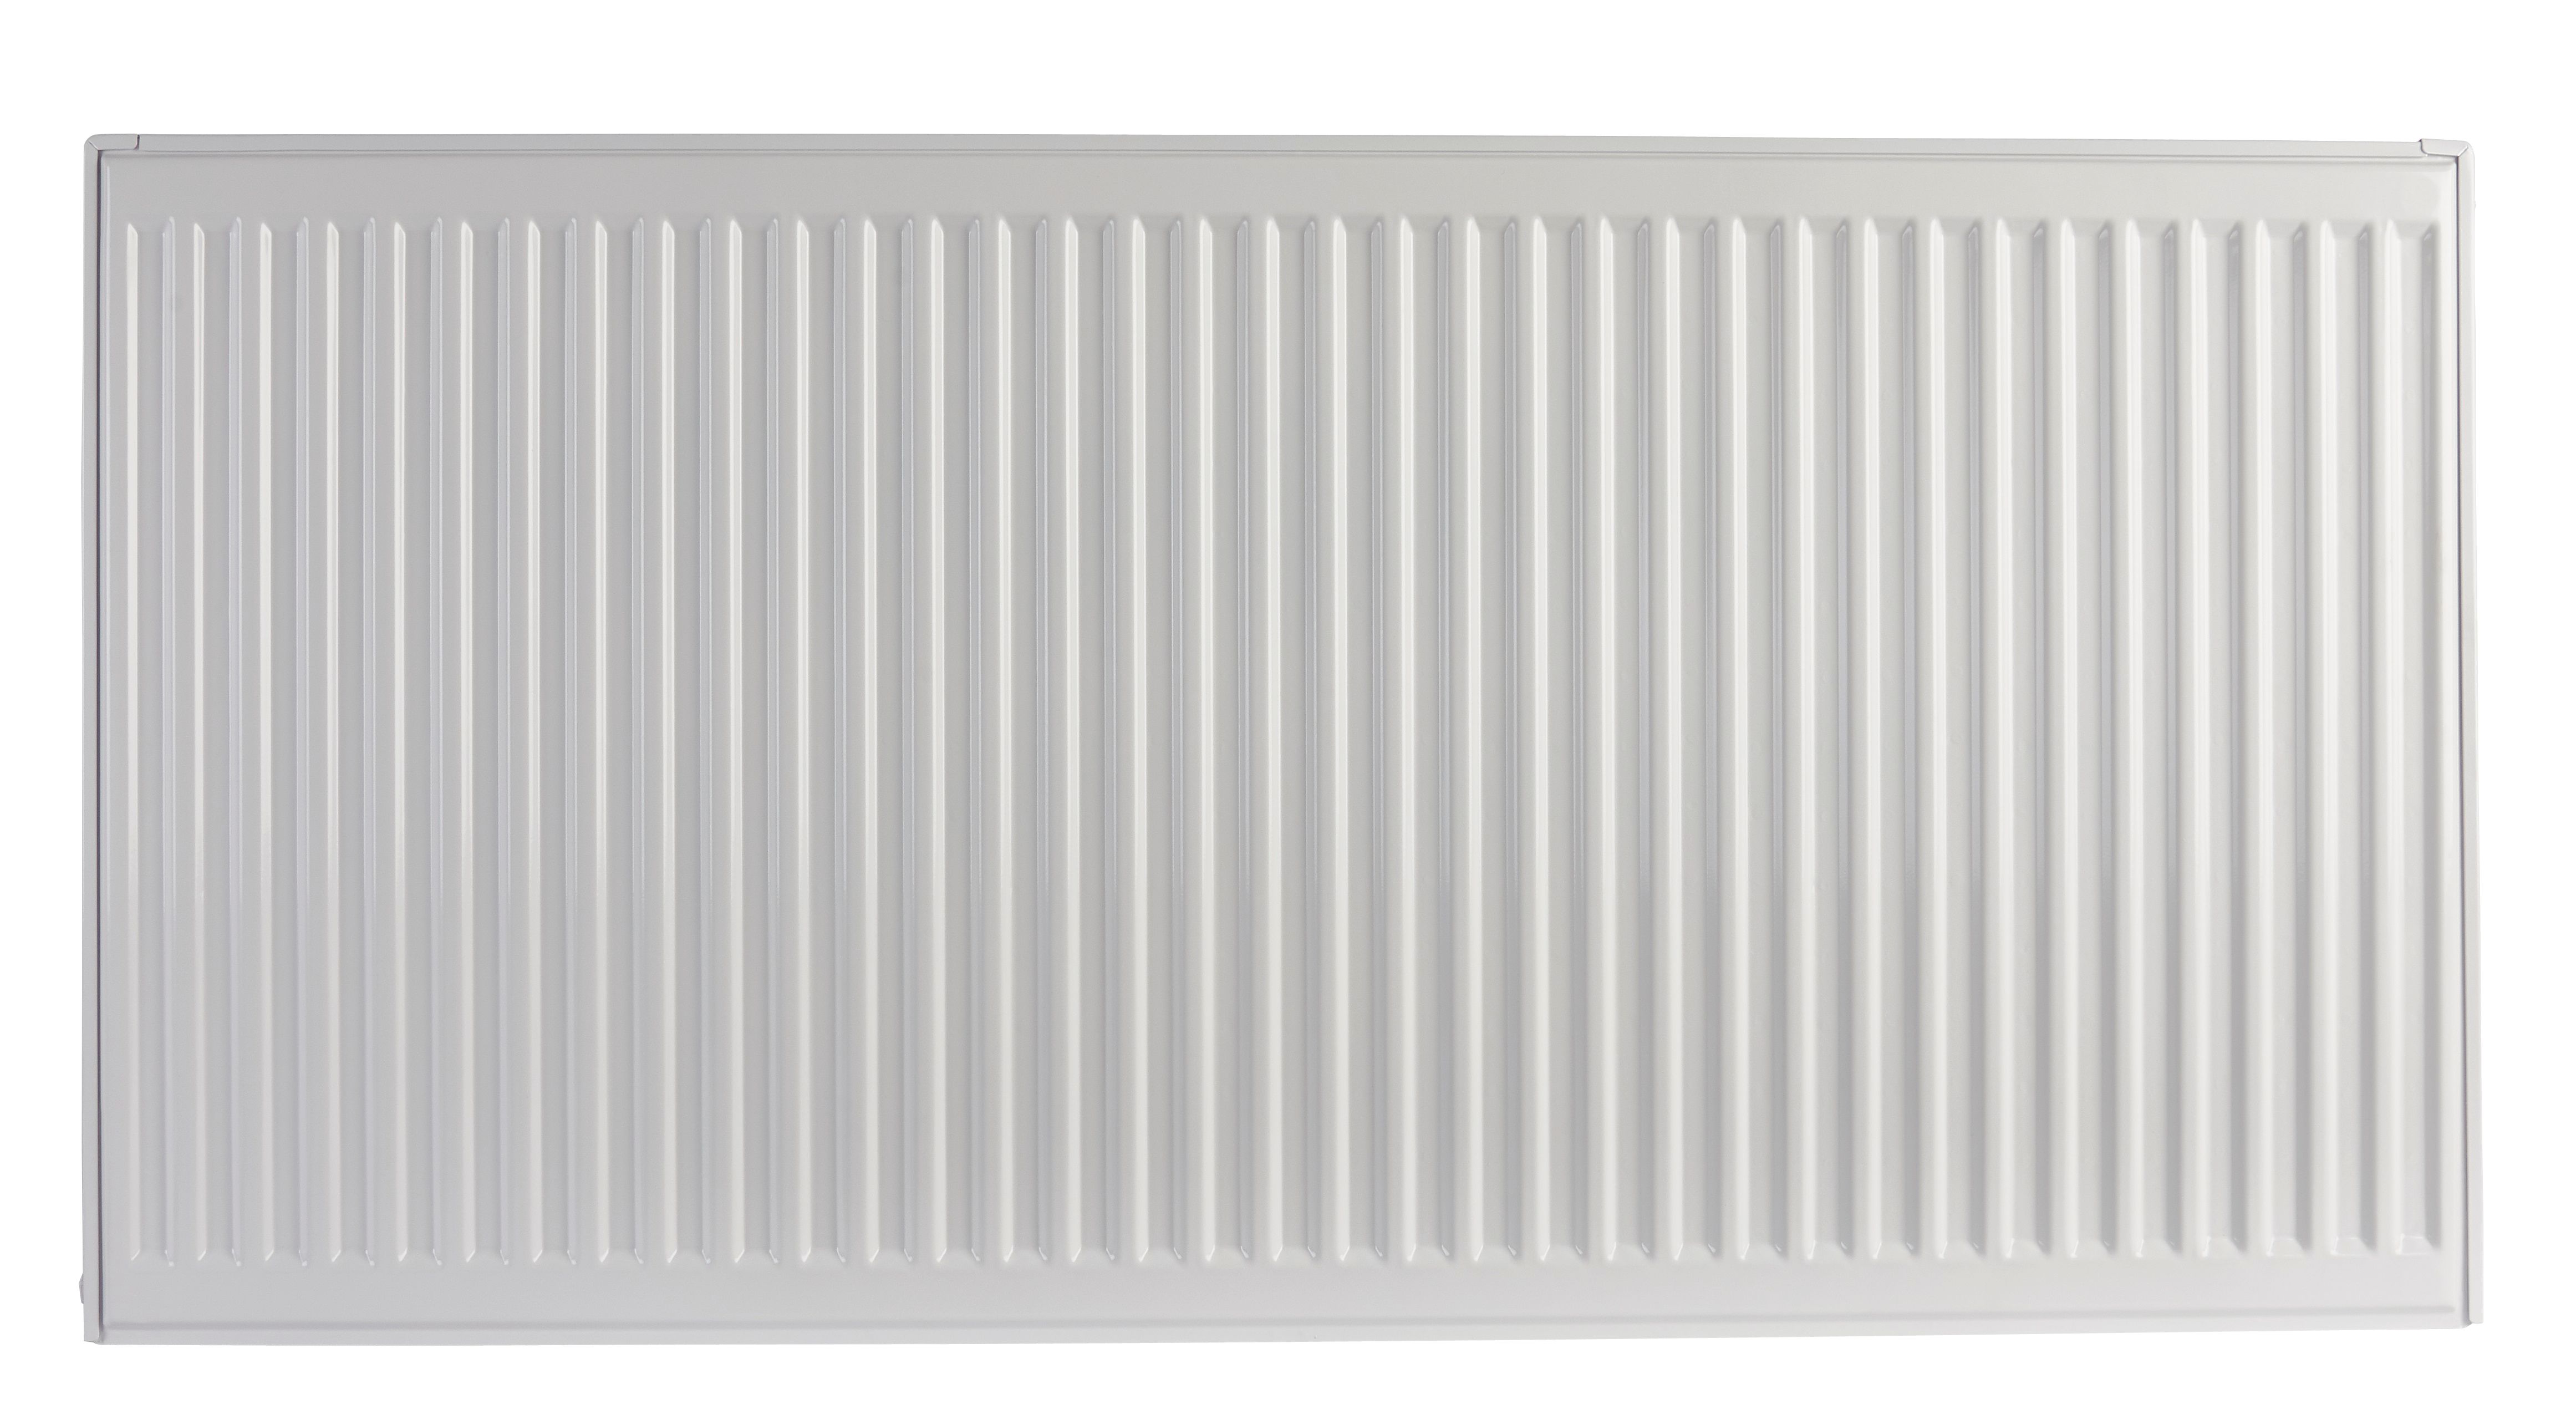 Homeline by Stelrad 700 x 900mm Type 21 Double Panel Plus Single Convector Radiator